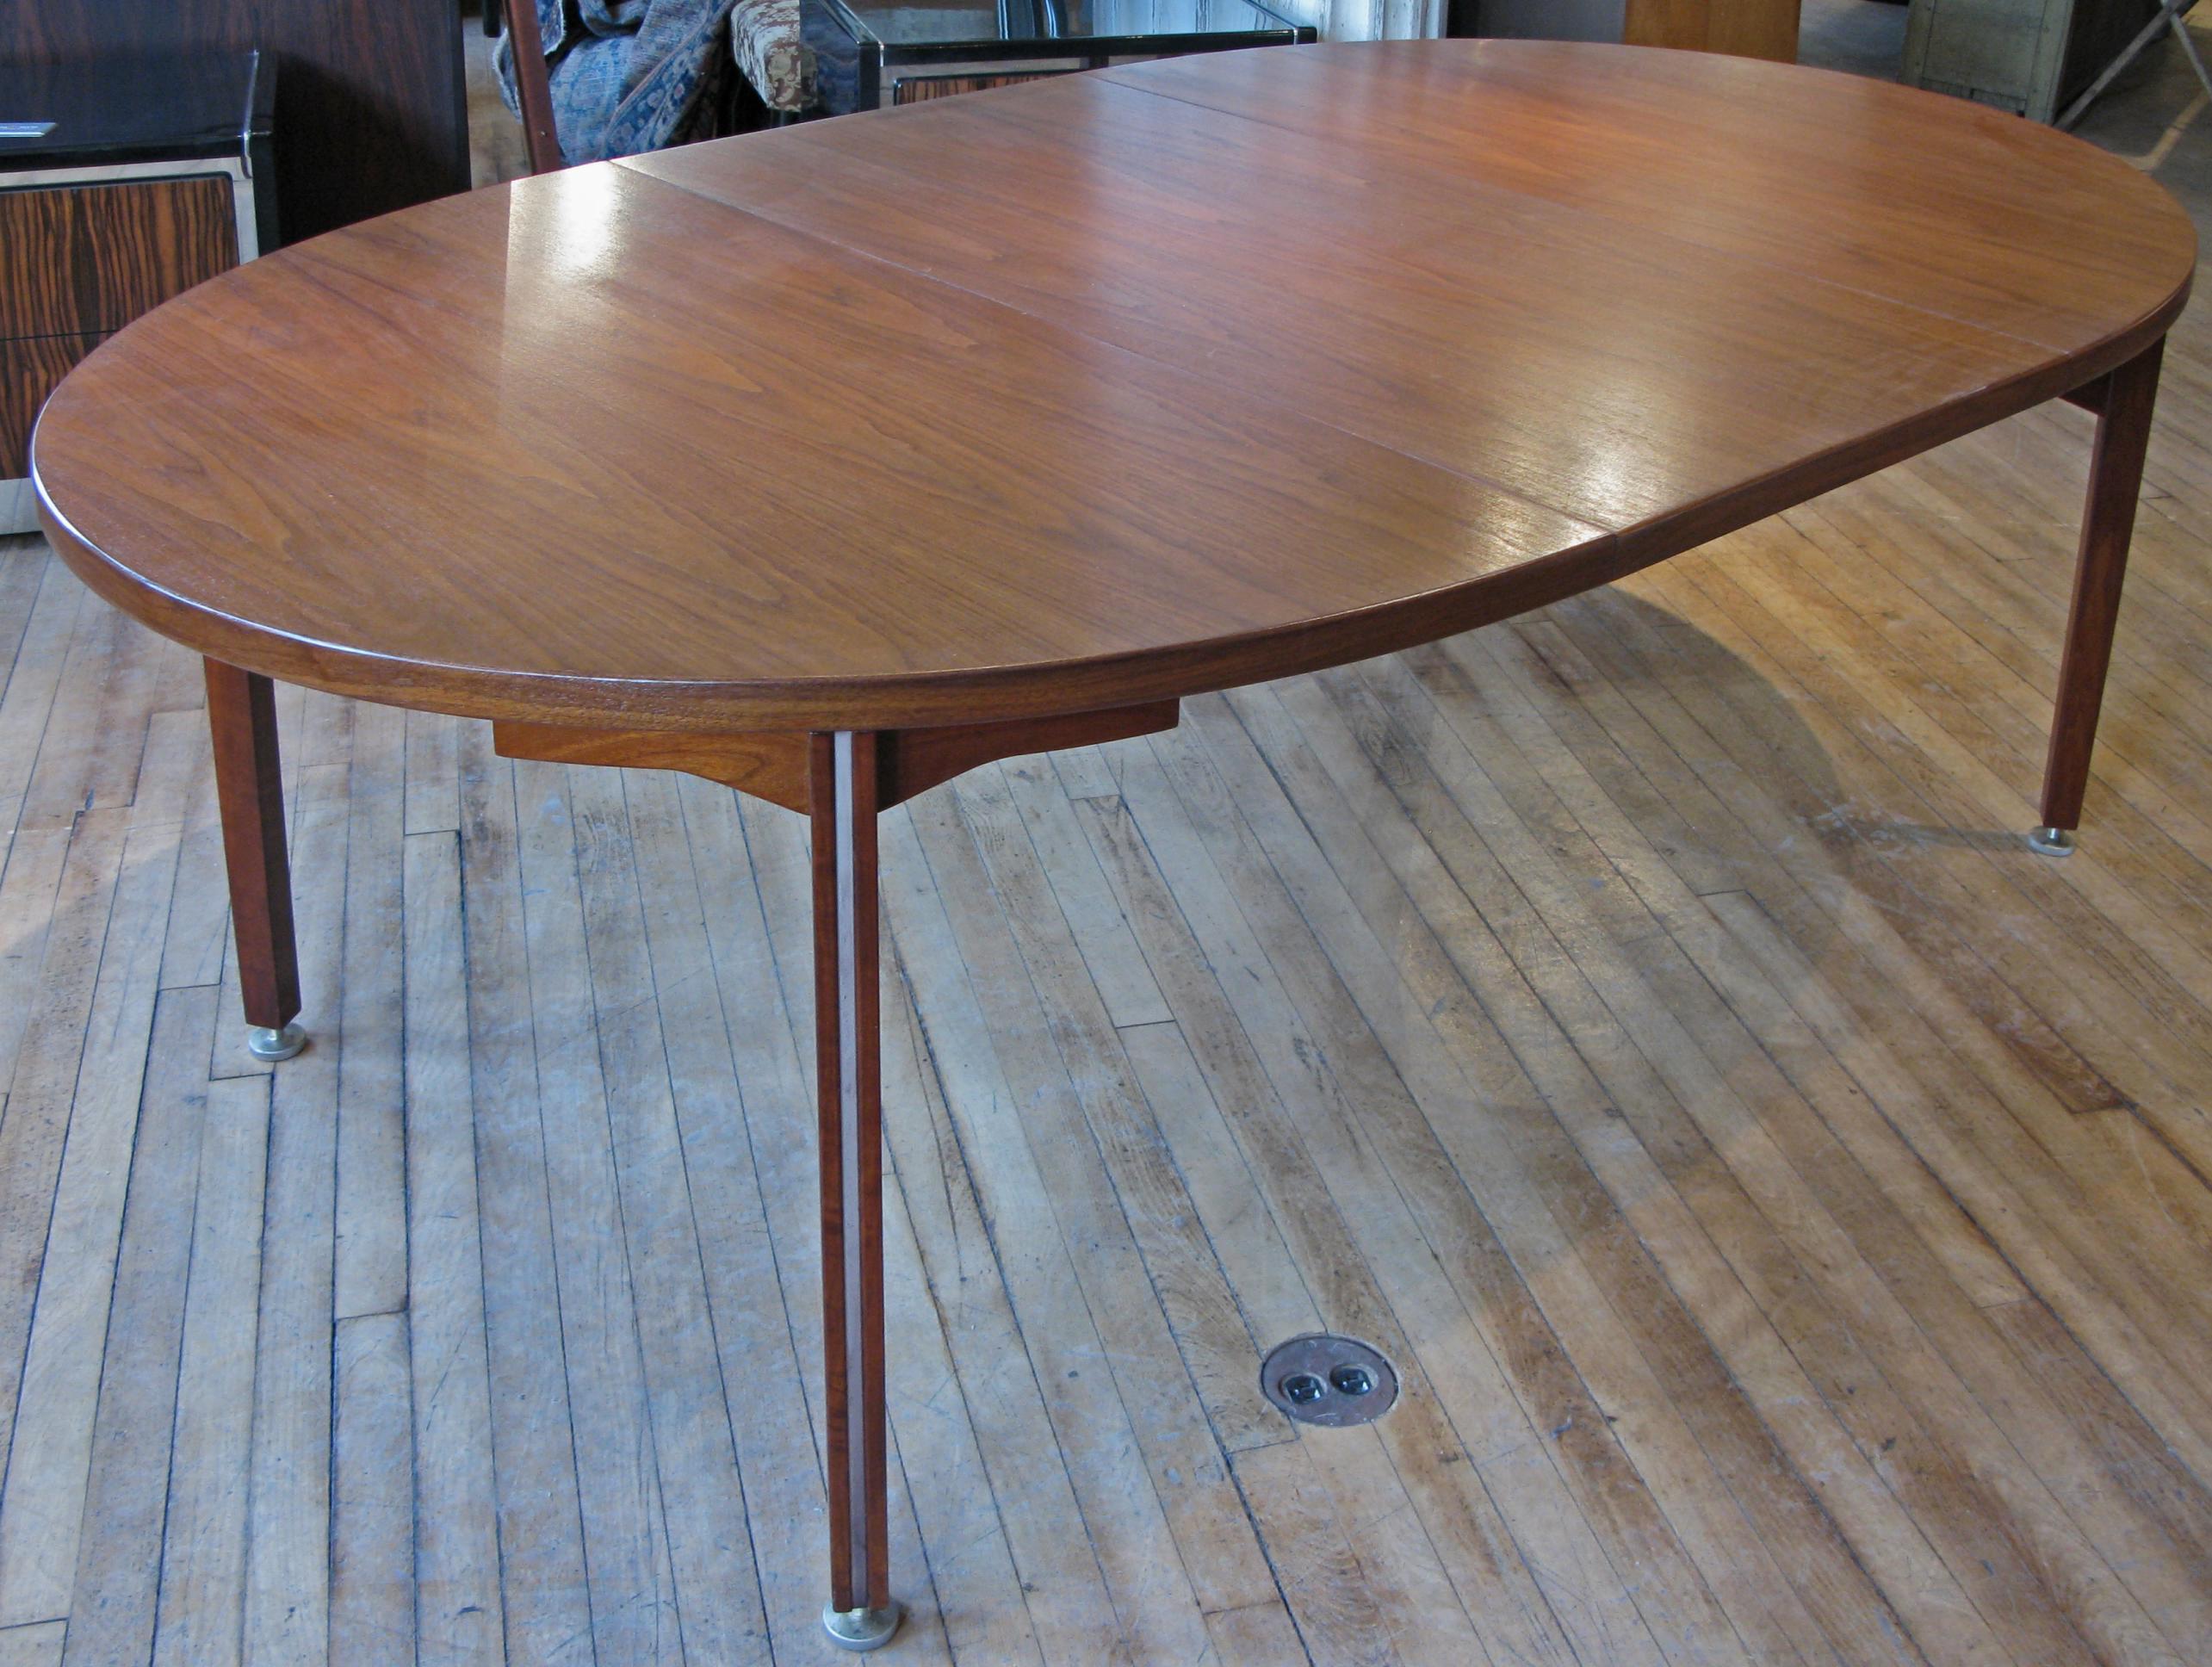 Vintage 1960s walnut dining table by Jens Risom. Dimension (with out Leaves) is 60 x 48. With addition of each 24